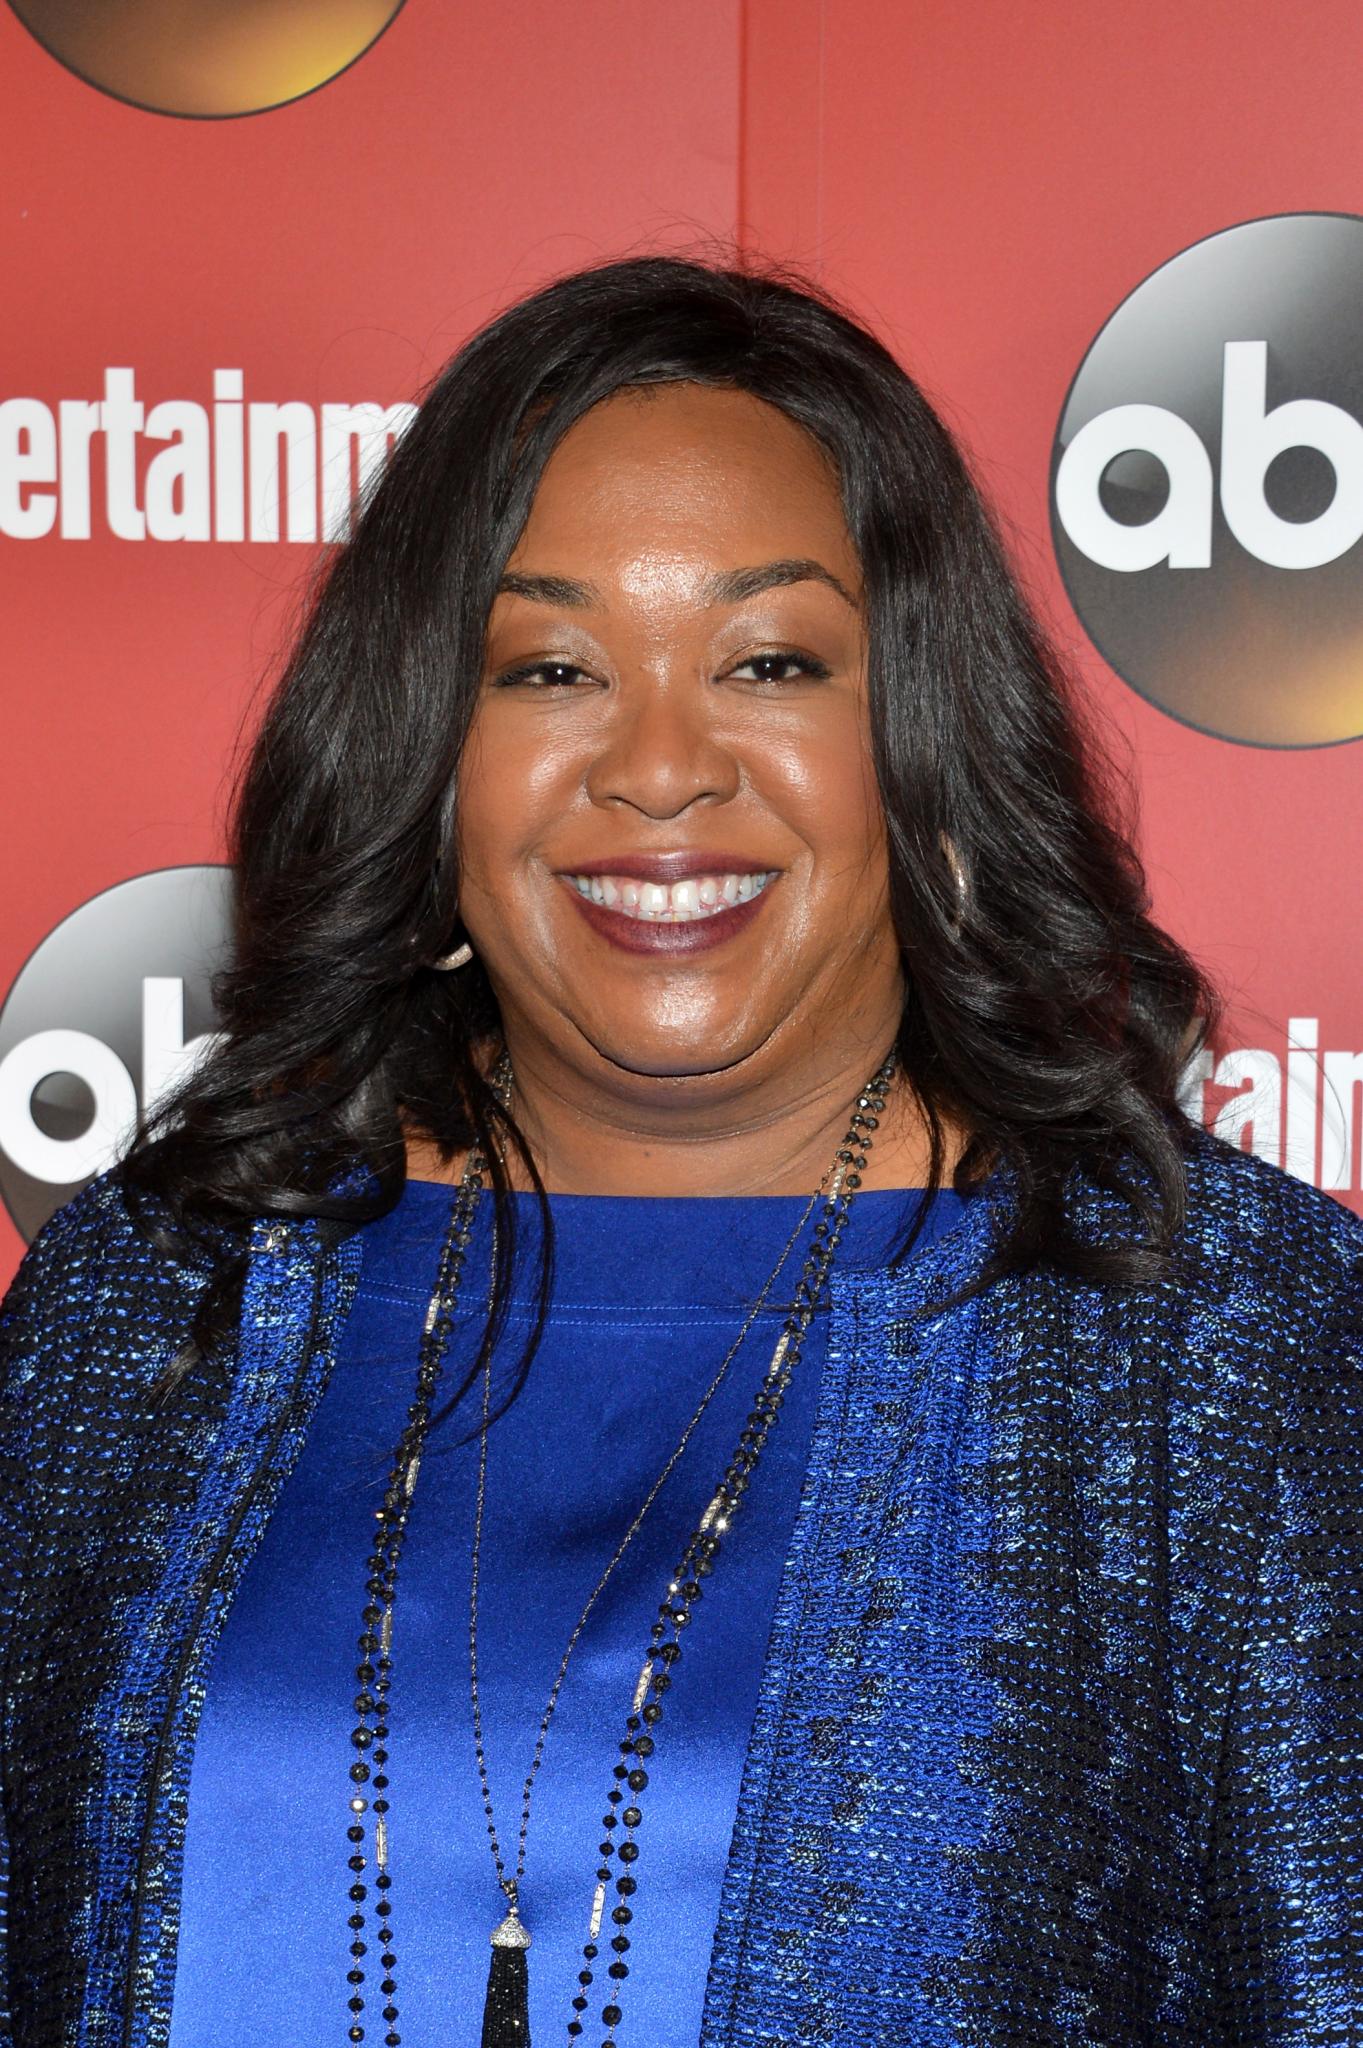 ABC Orders Third Shonda Rhimes Drama, ‘How to Get Away With Murder’